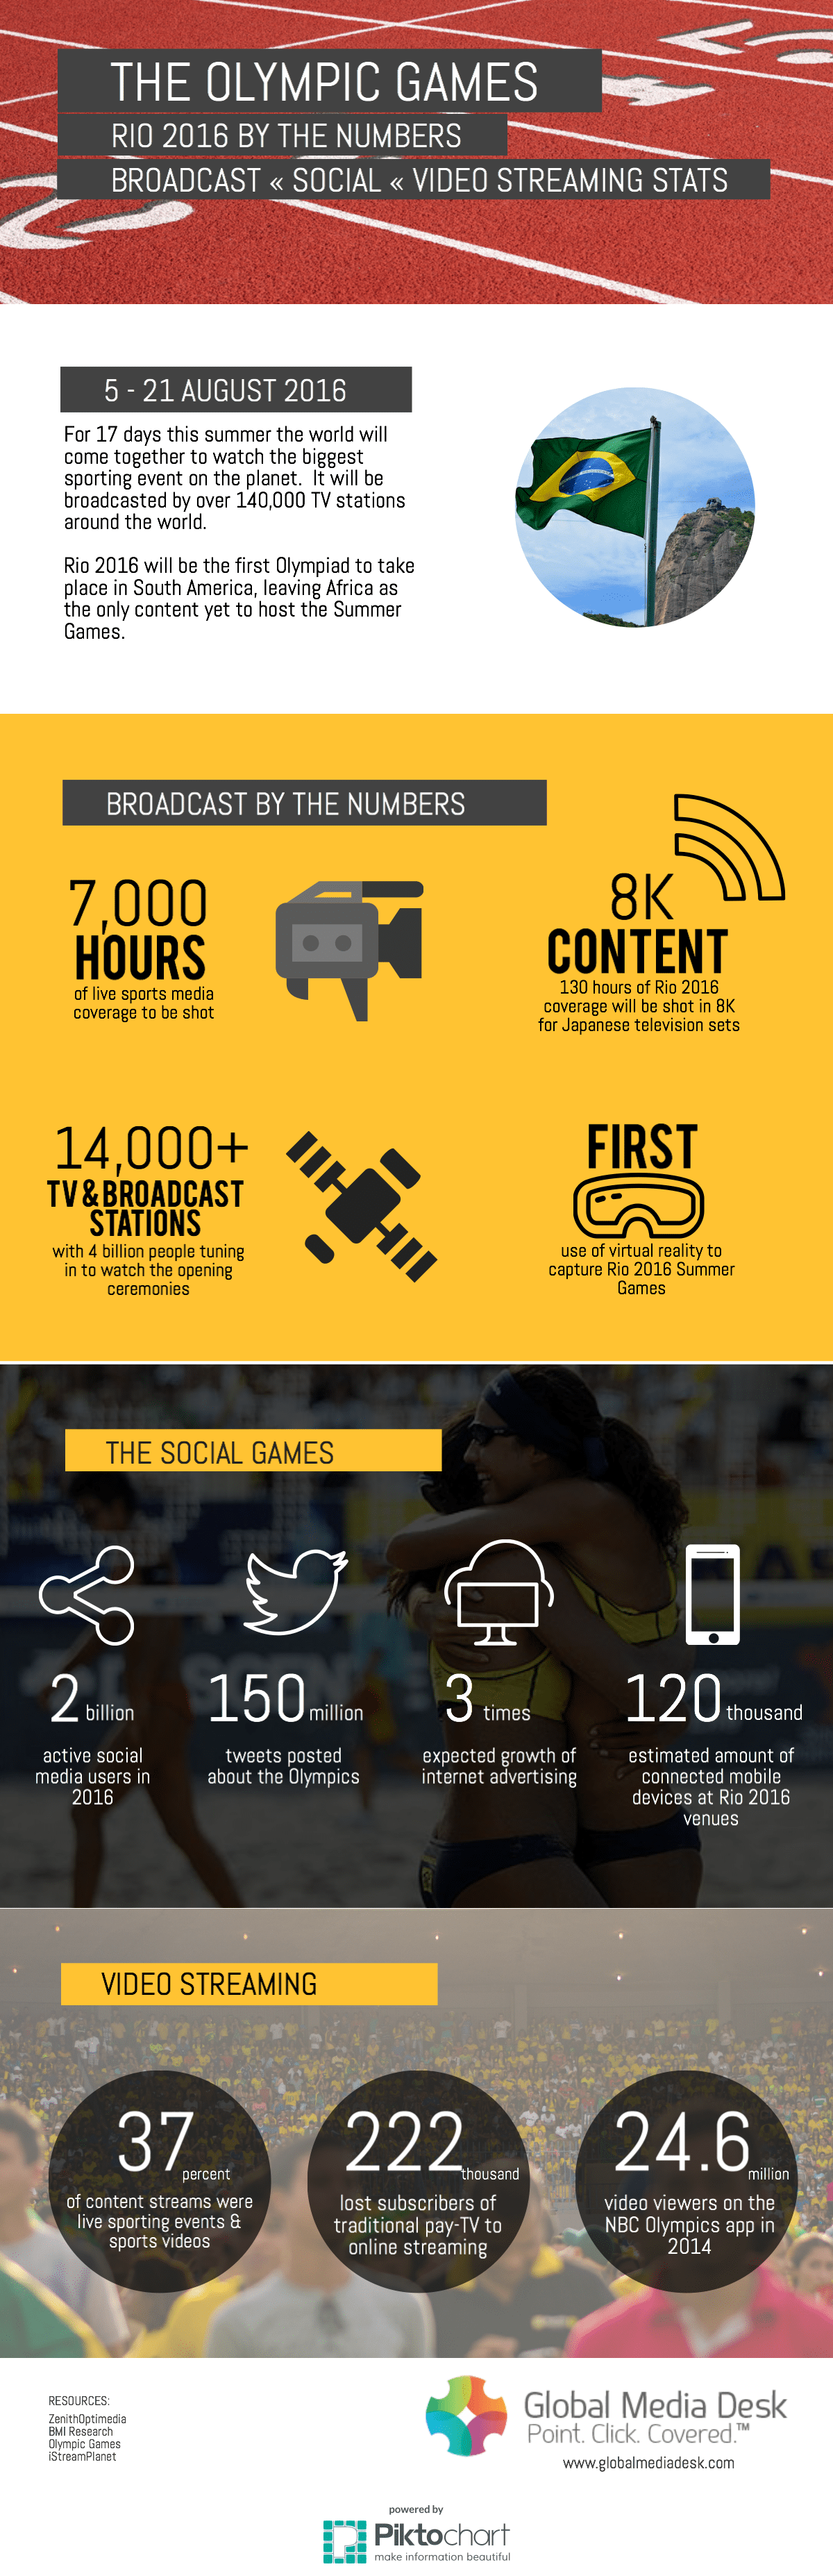 The Olympic Games: Rio 2016 by the Numbers